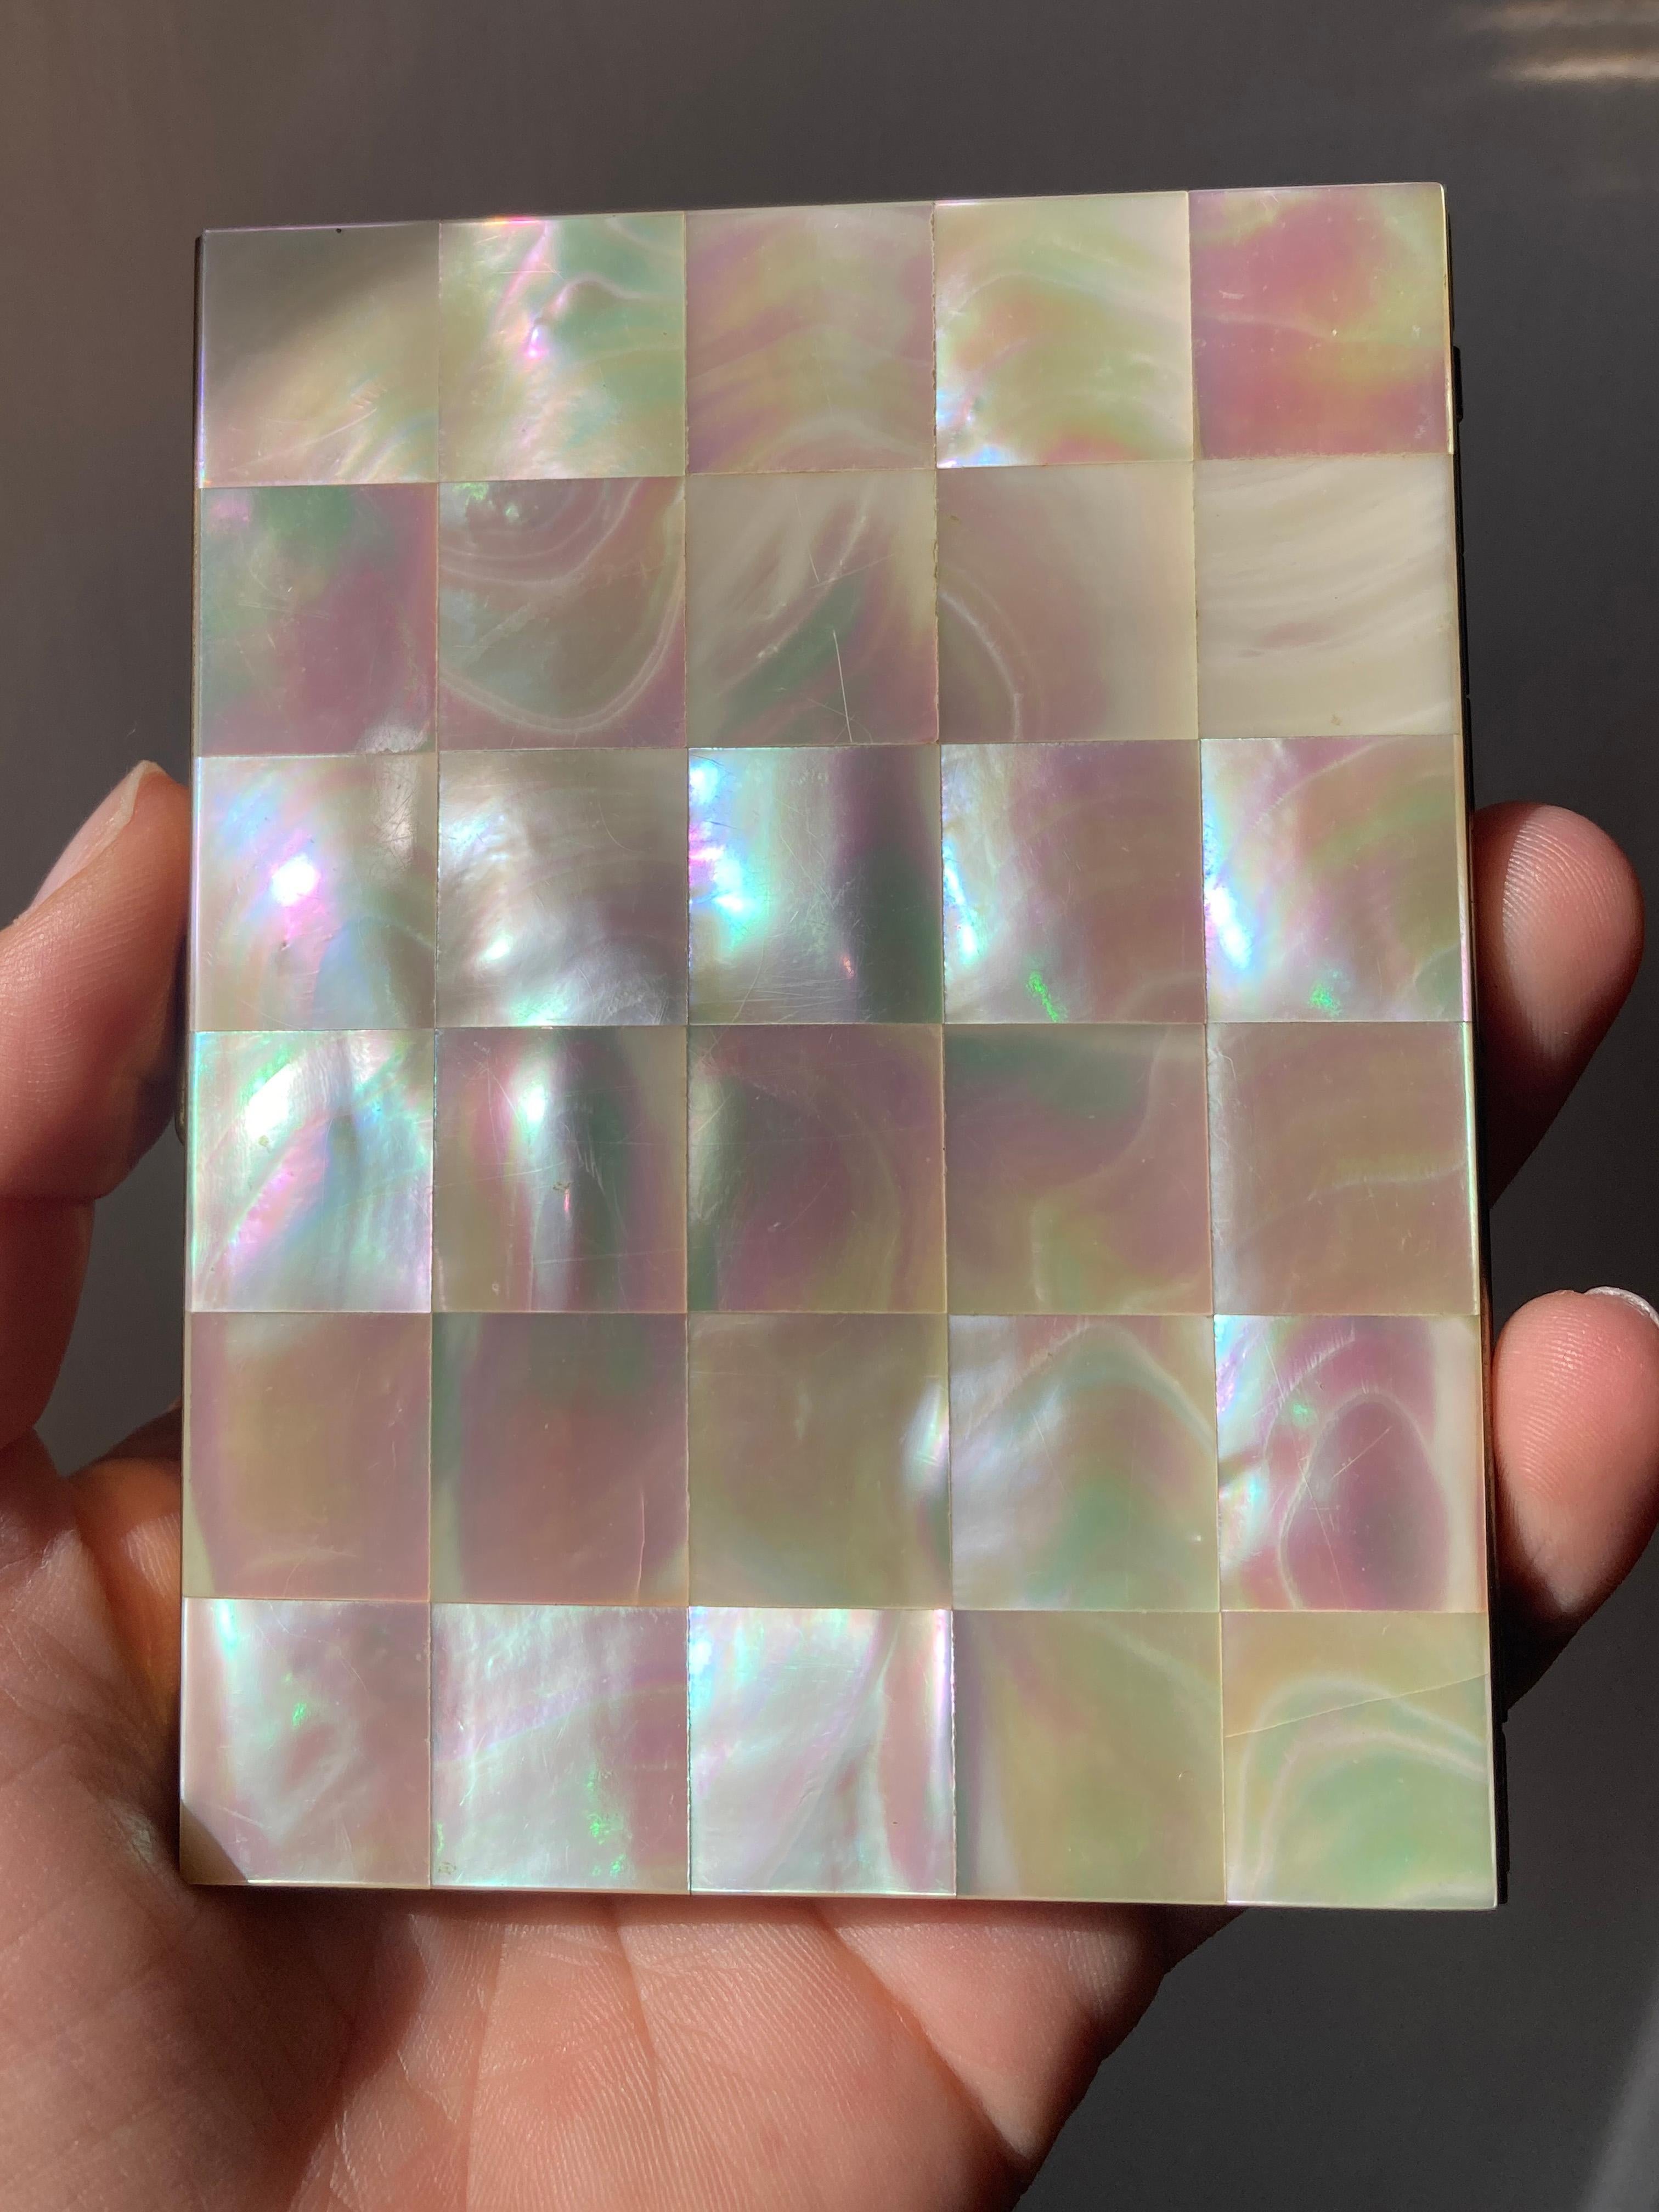 This 1950s cigarette case Mother of pearl, is a true vintage treasure, crafted from 24K gold-plated metal for an opulent touch. Its exterior boasts a sophisticated design featuring mother-of-pearl arranged in a classic checkerboard pattern, adding a